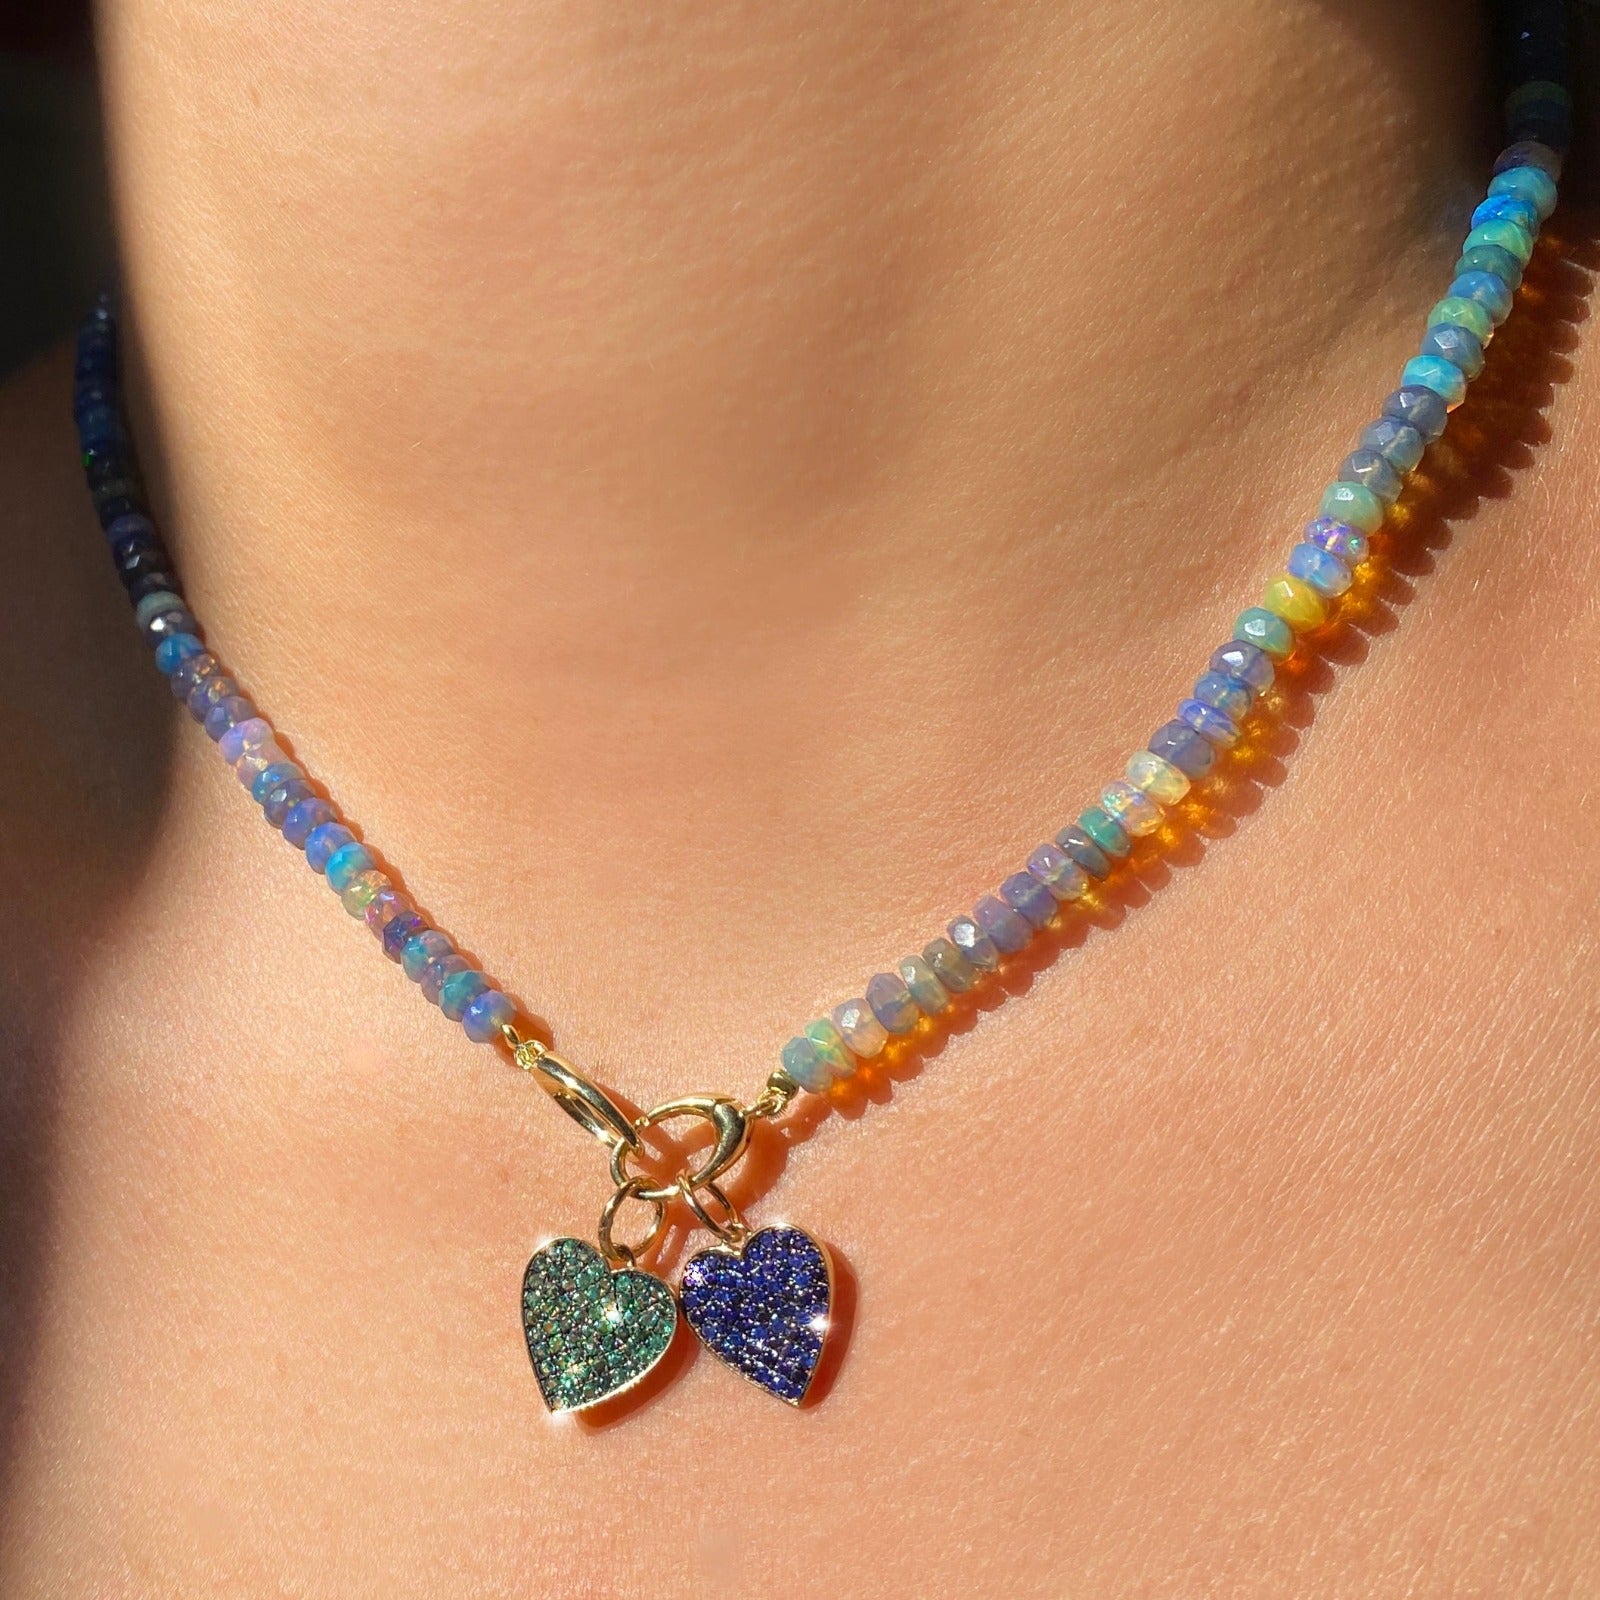 Shimmering beaded necklace made of faceted opals in shades of light blue, light purple, yellow, white, and clear on a gold linking ovals clasp. Styled on a neck with two medium pave heart charms.